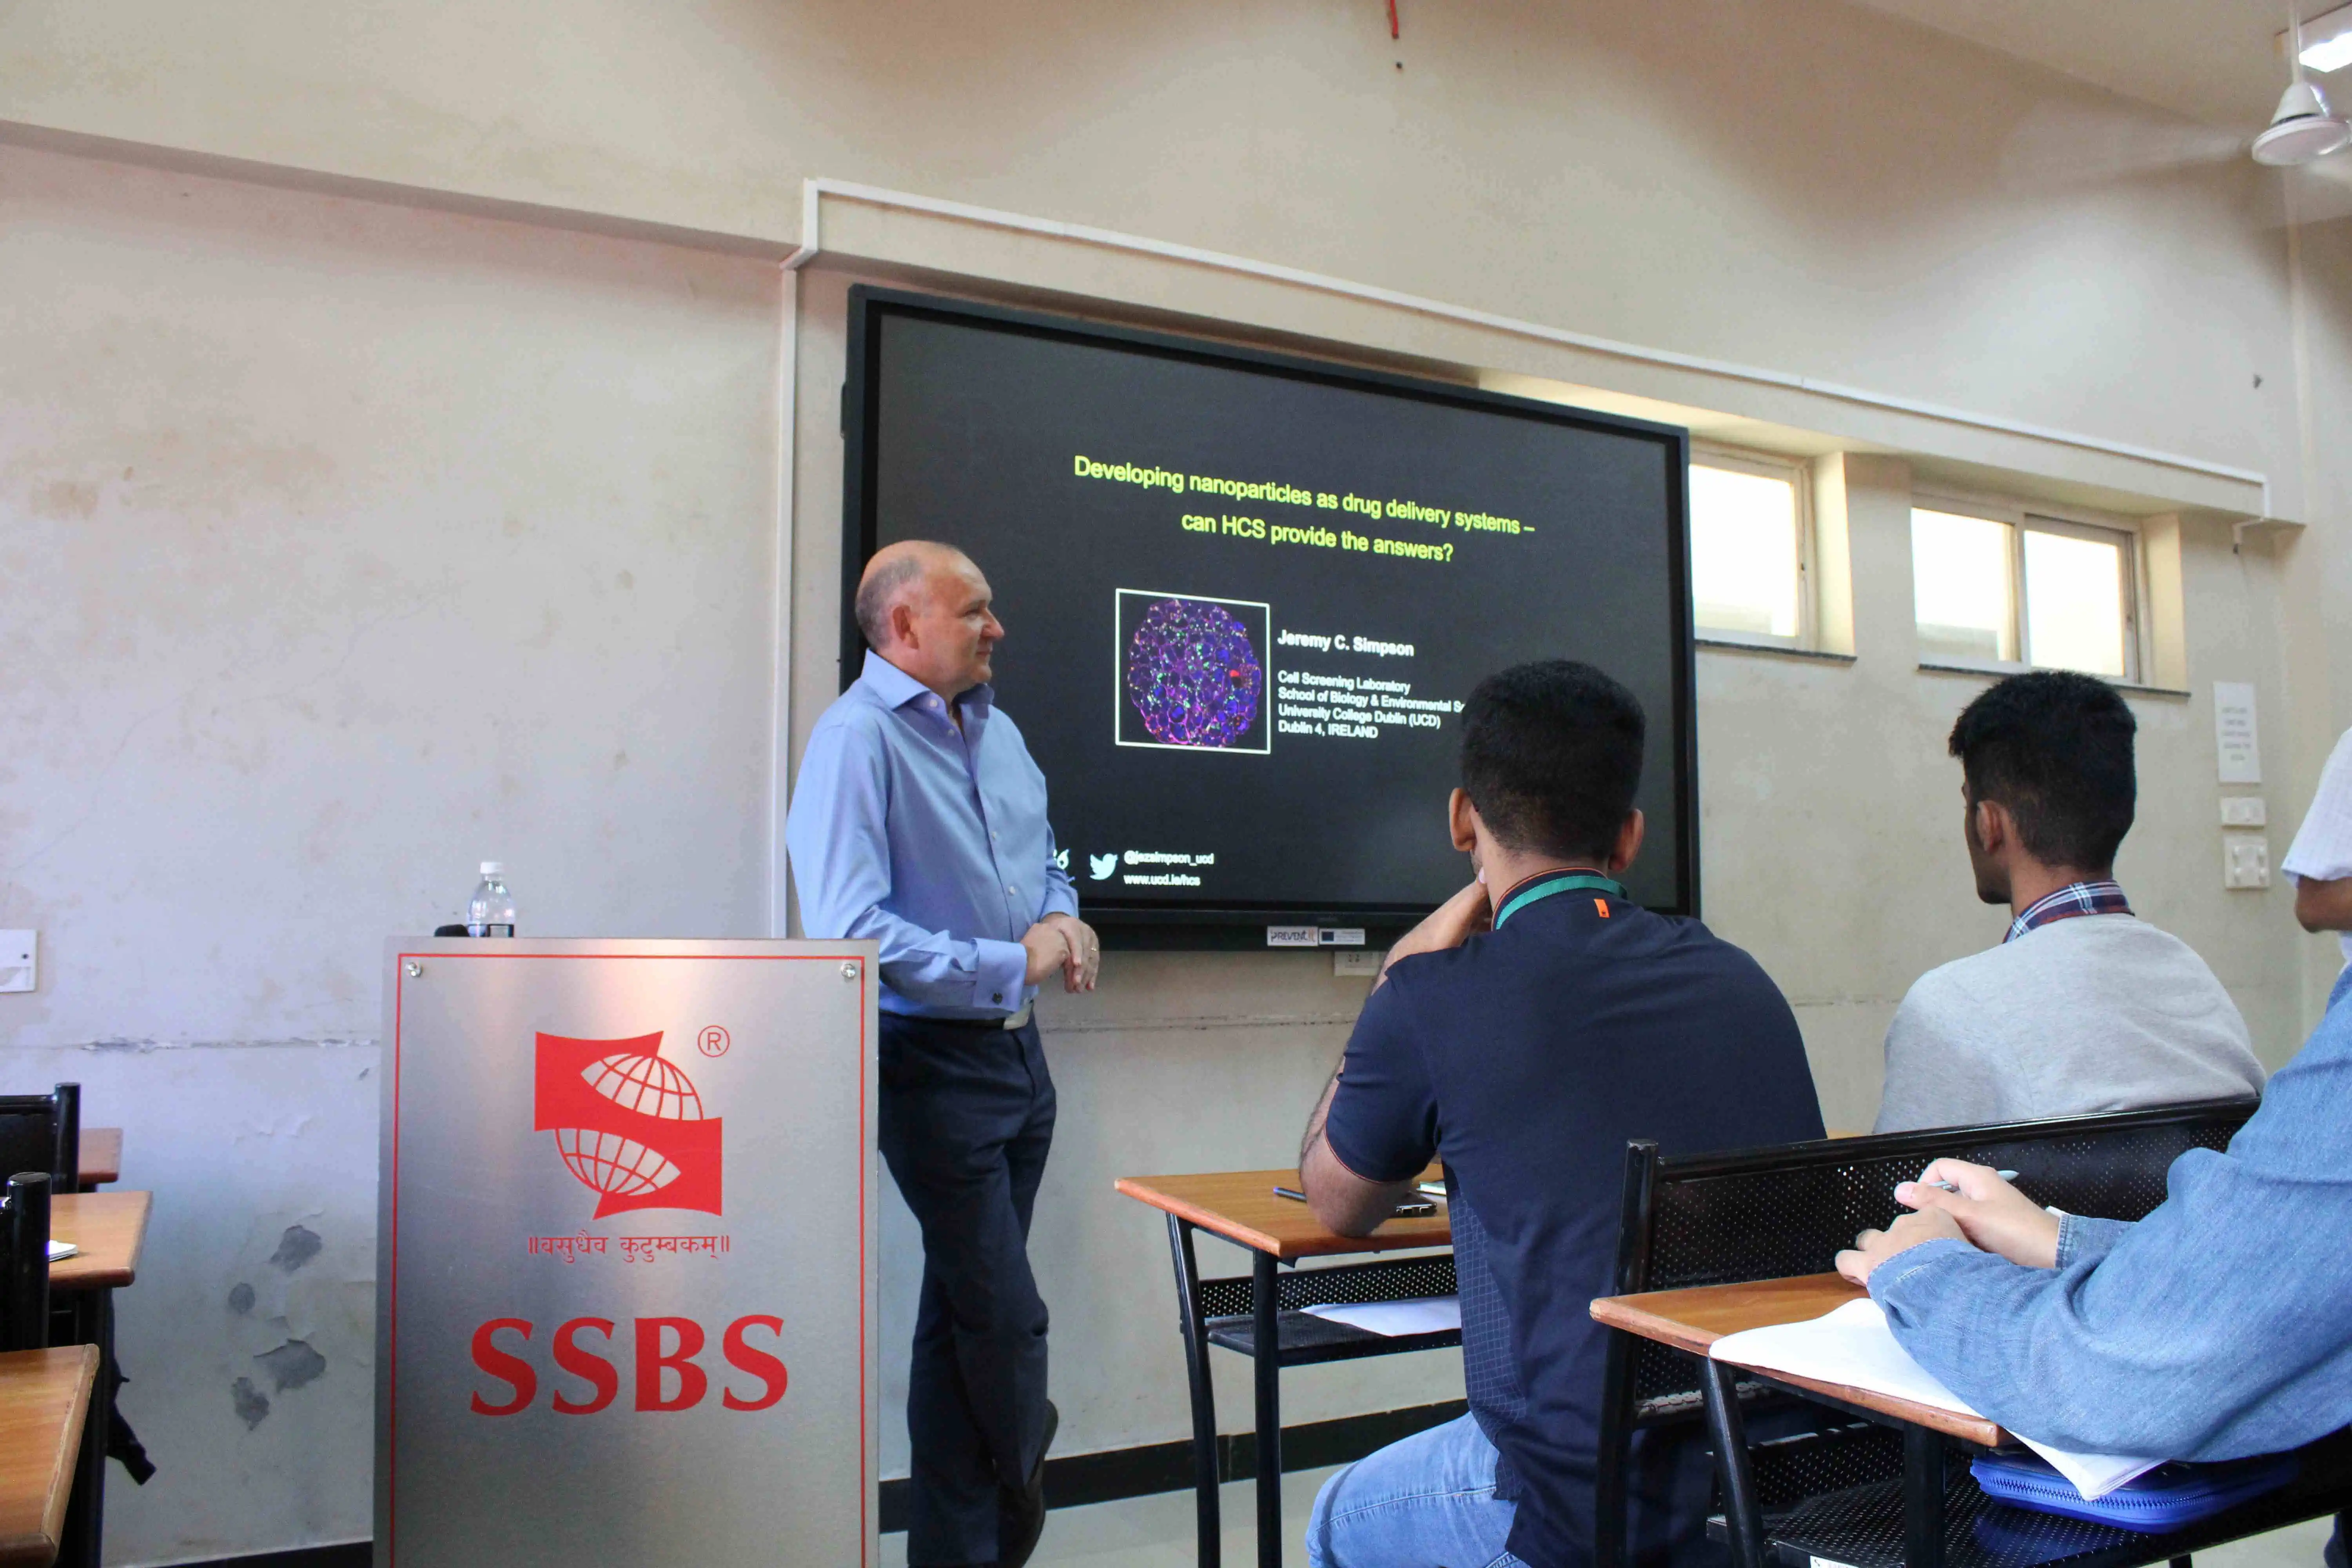 Prof. Jeremy Simpson, School of Biology and Environmental Science, University of Dublin, Ireland. 27th August 2022. Lecture title: Drug delivery systems: Can HCS provide the answers?